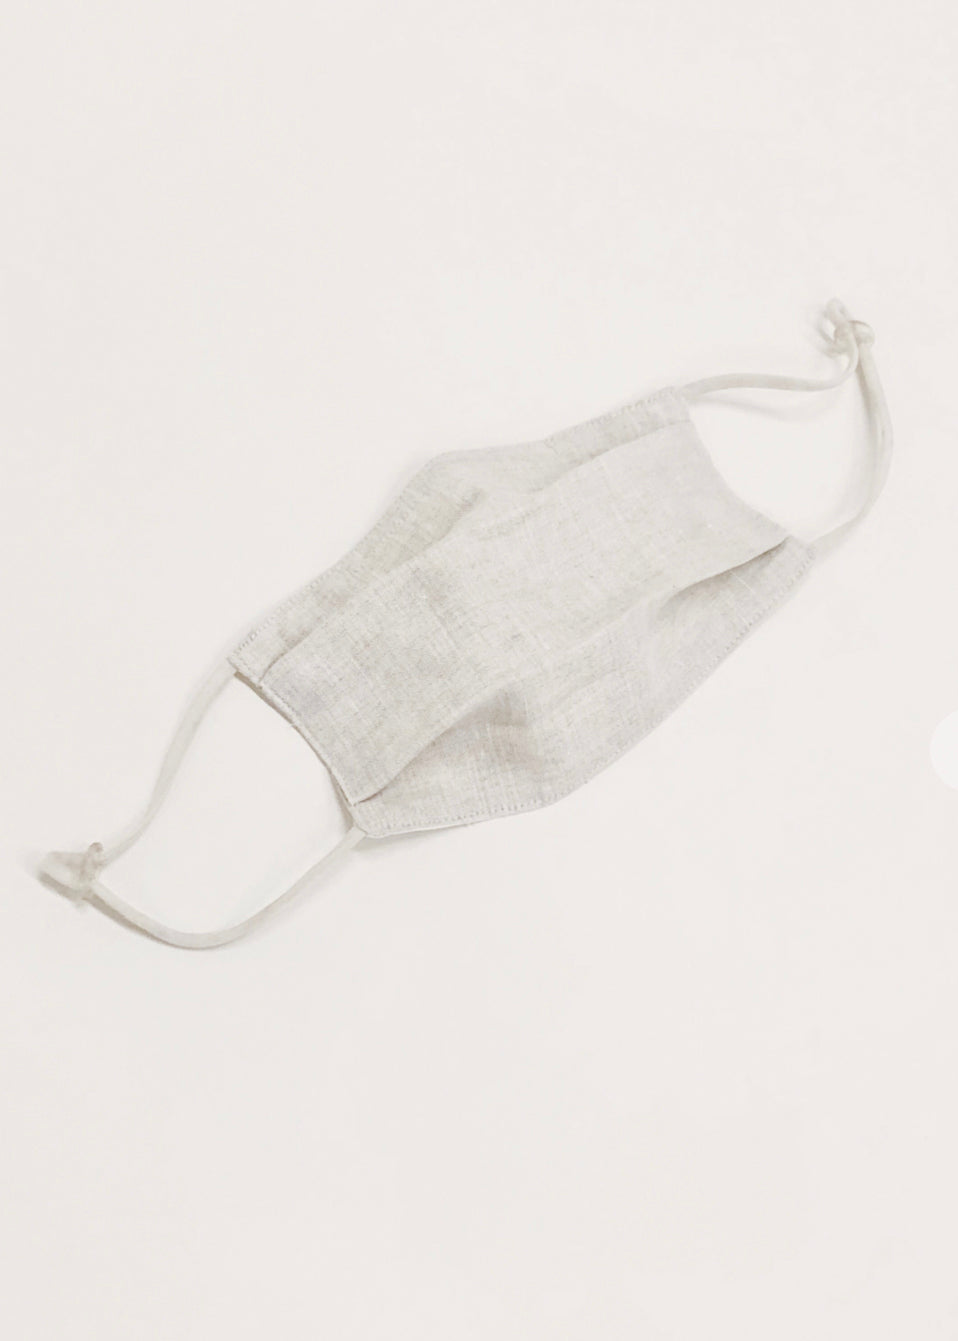 Ivory Linen Adjustable Face Mask Accessories